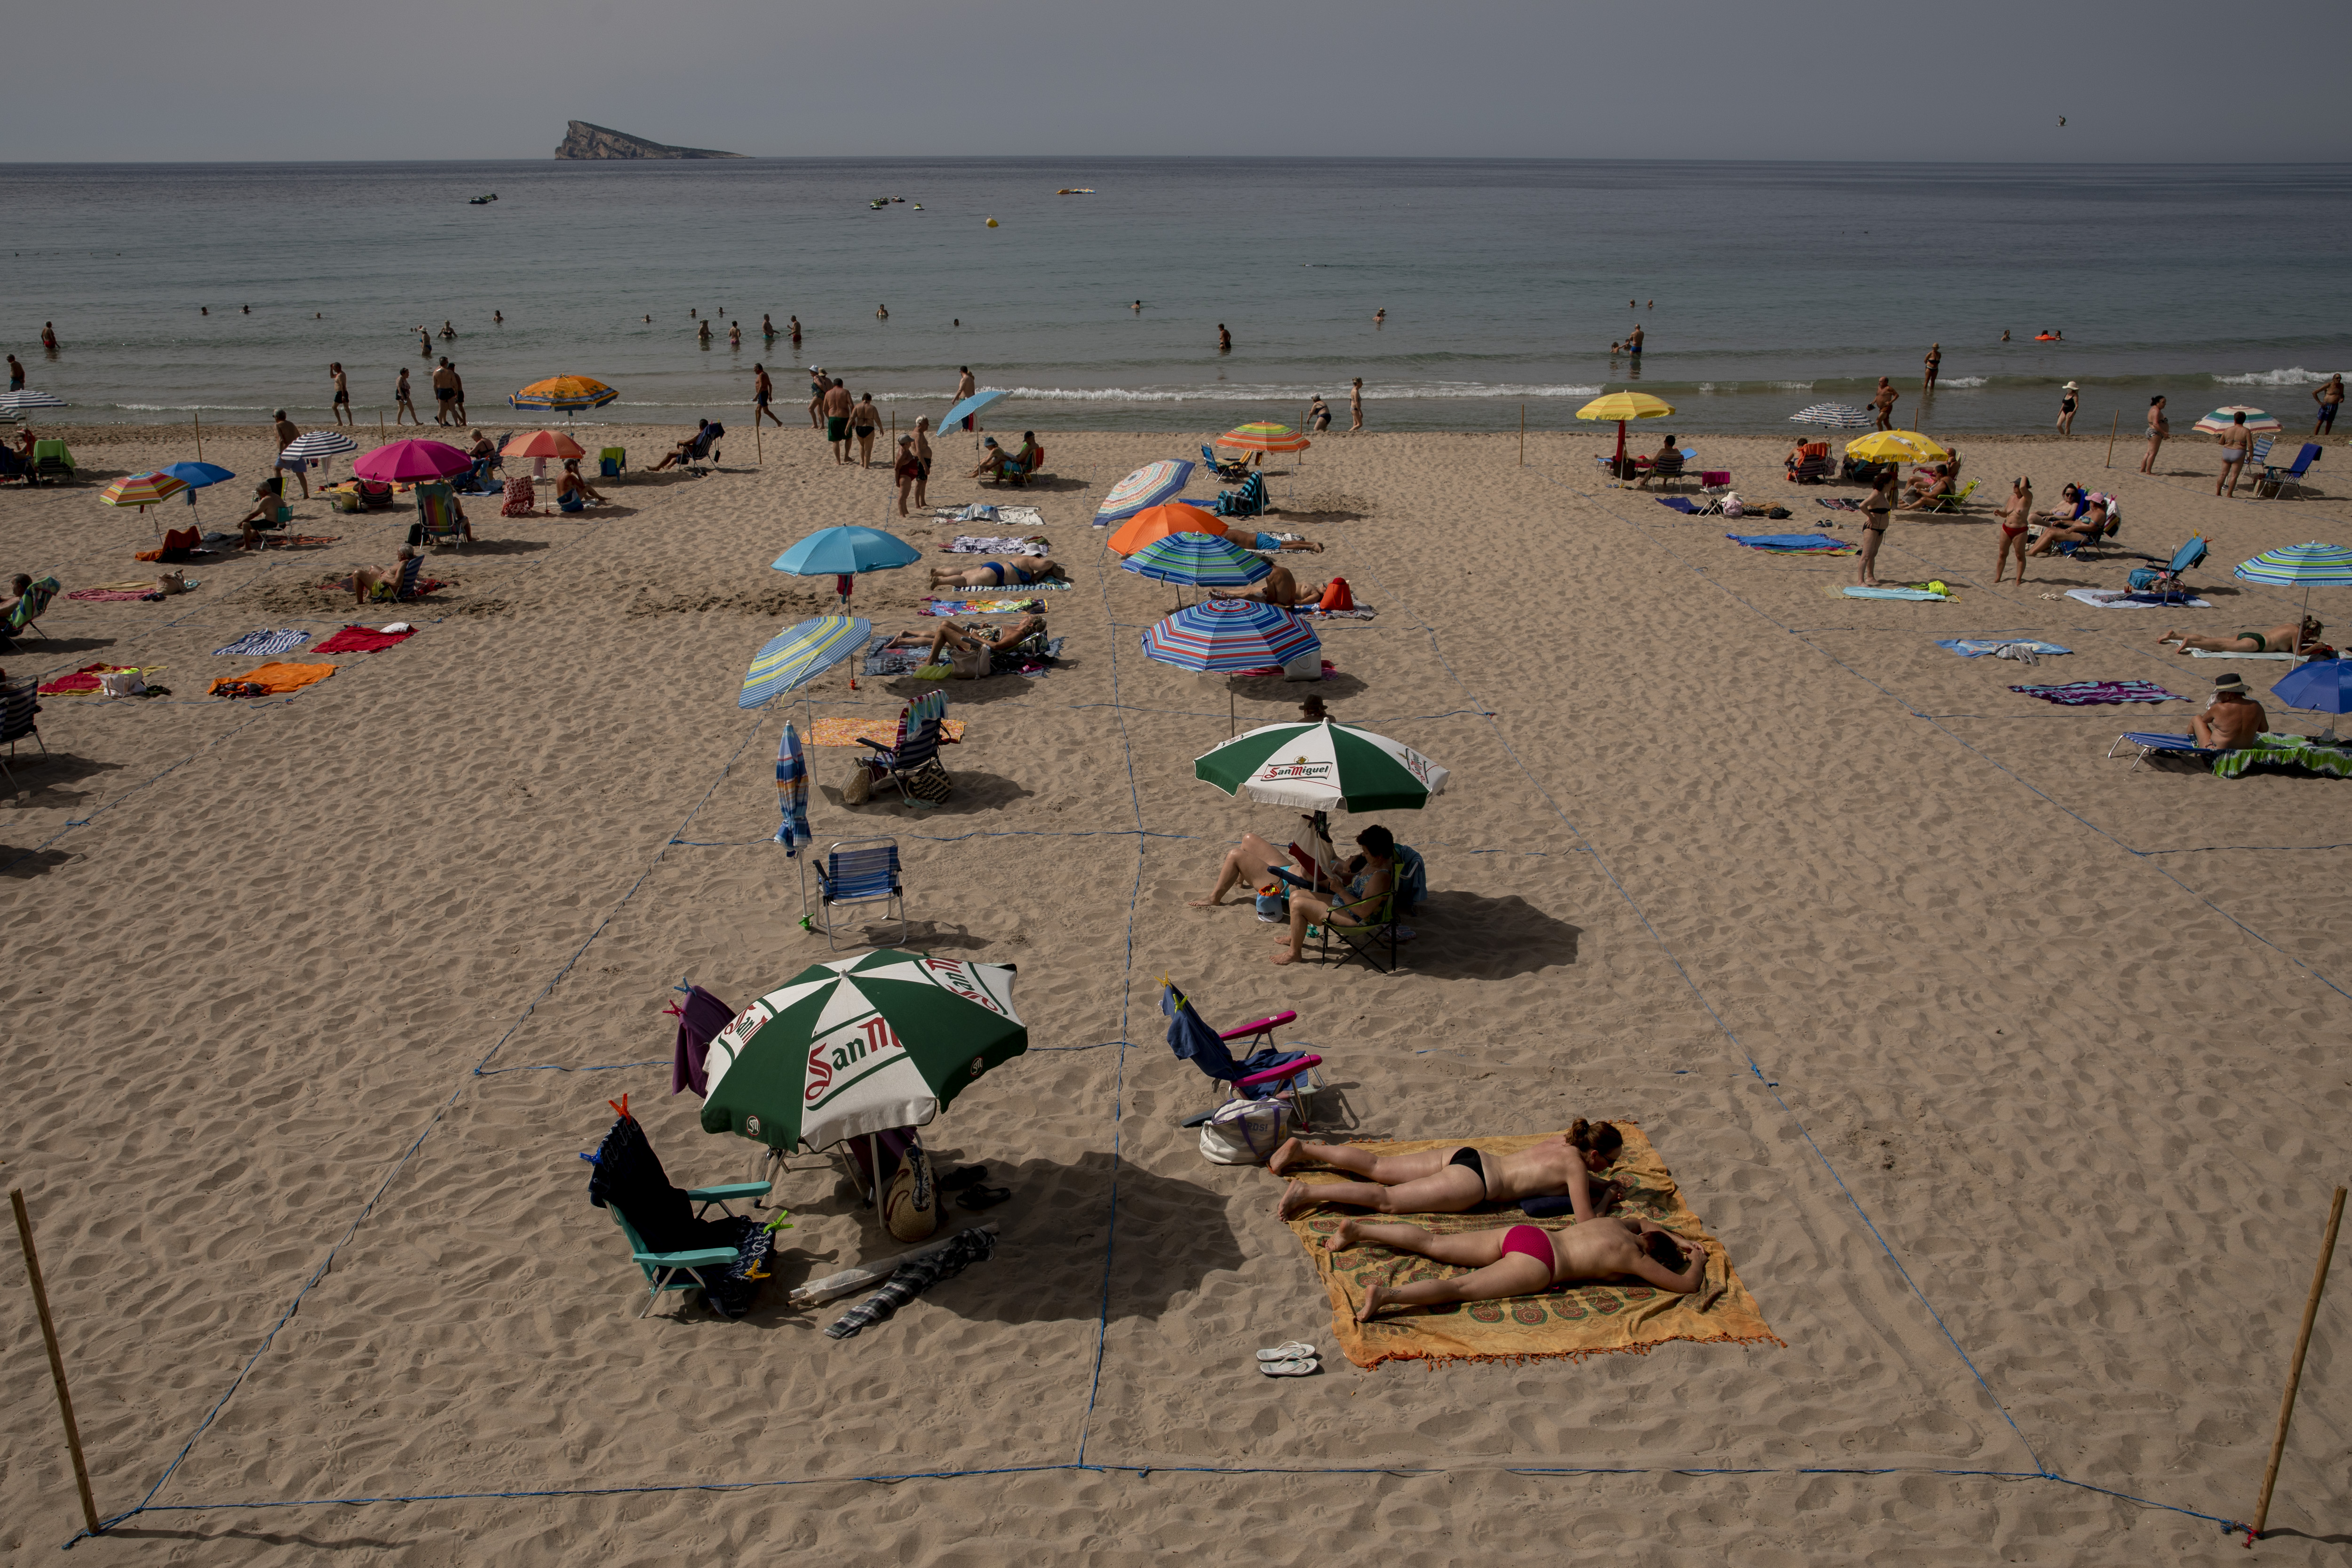 The police in Benidorm have warned holidaymakers to respect the thin blue lines found on the sand